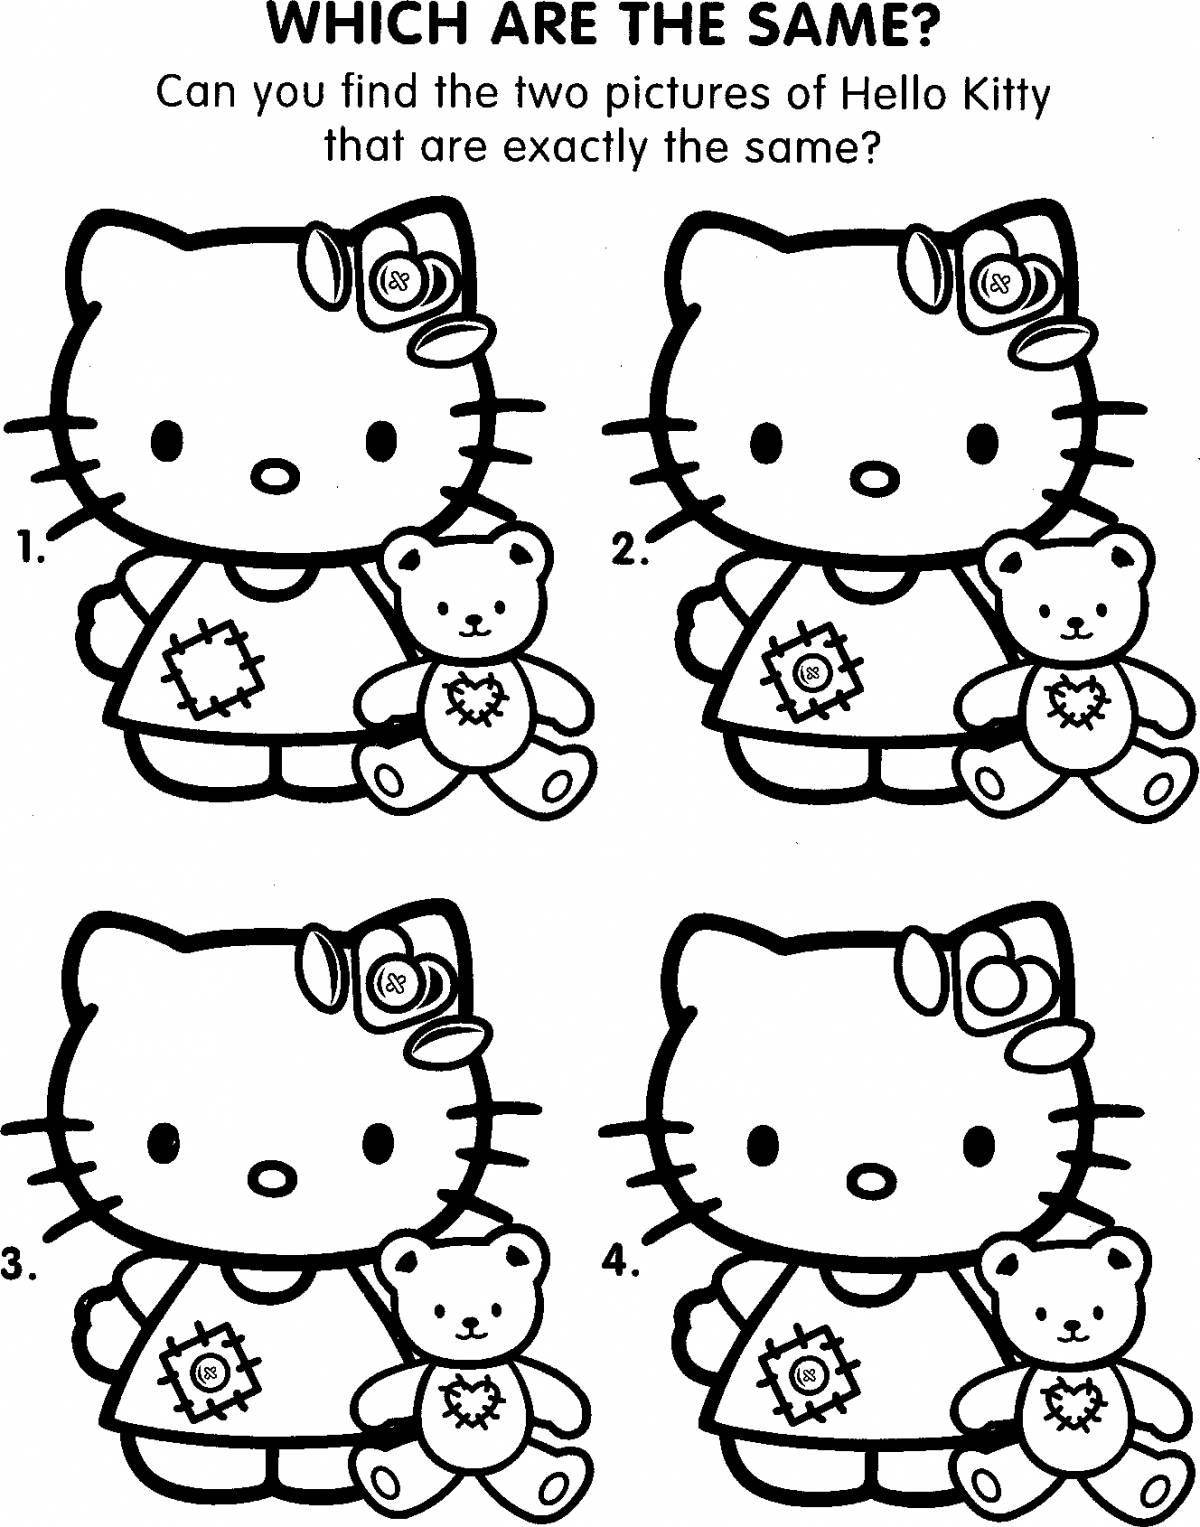 Colored crazy hello kitty stickers coloring book